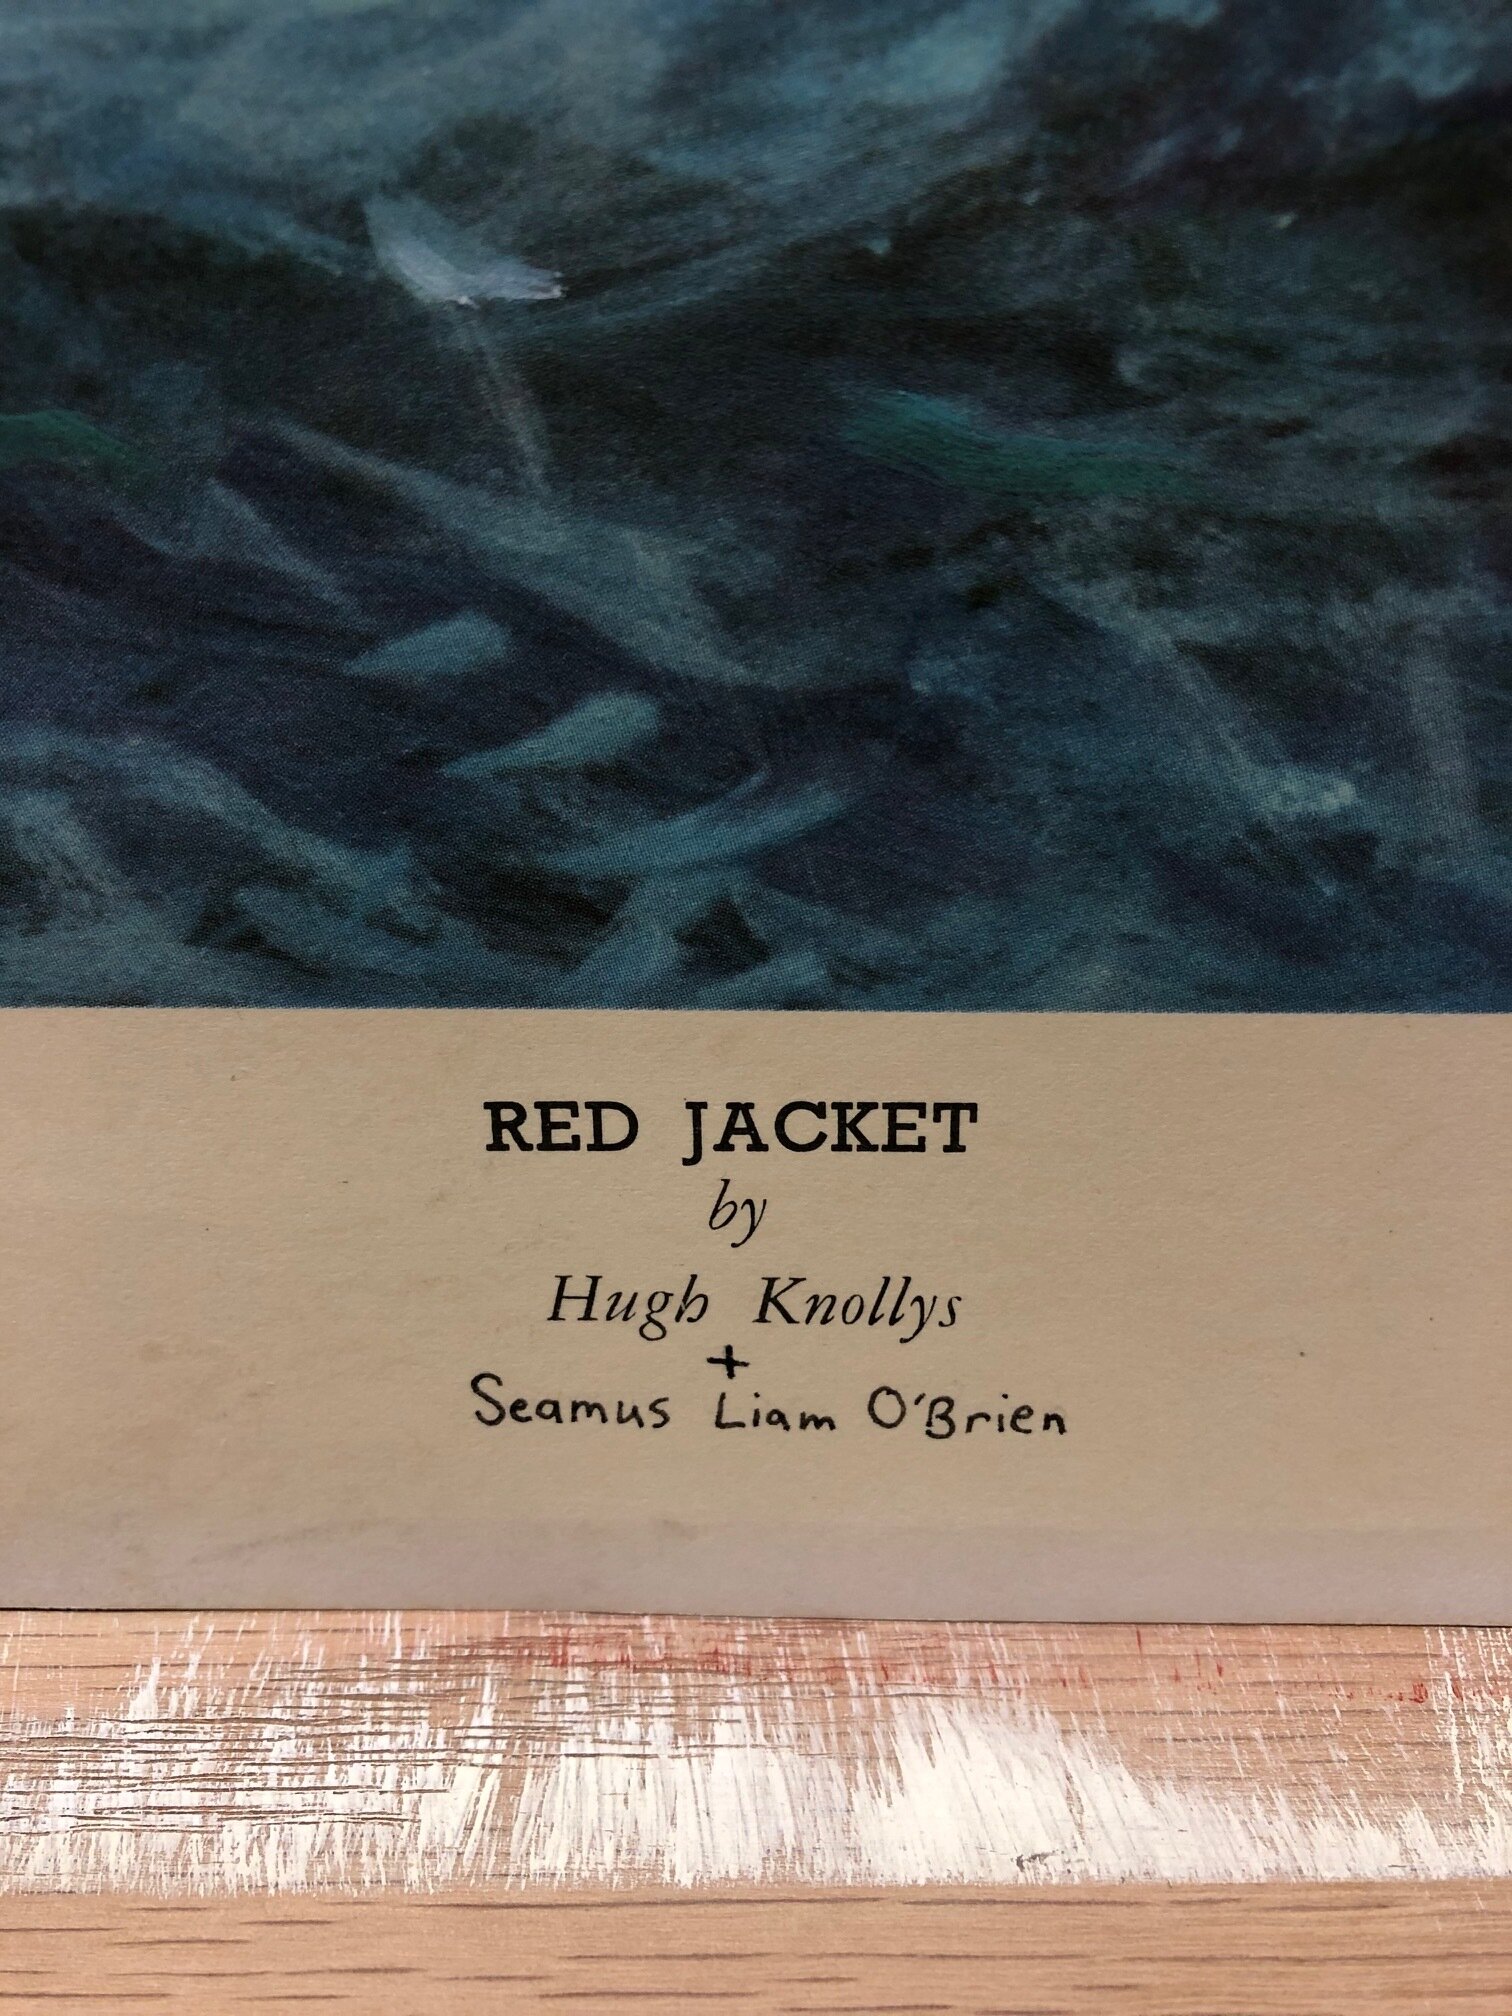 Red Jacket by Hugh Knolleys AND Seamus Liam O'Brien